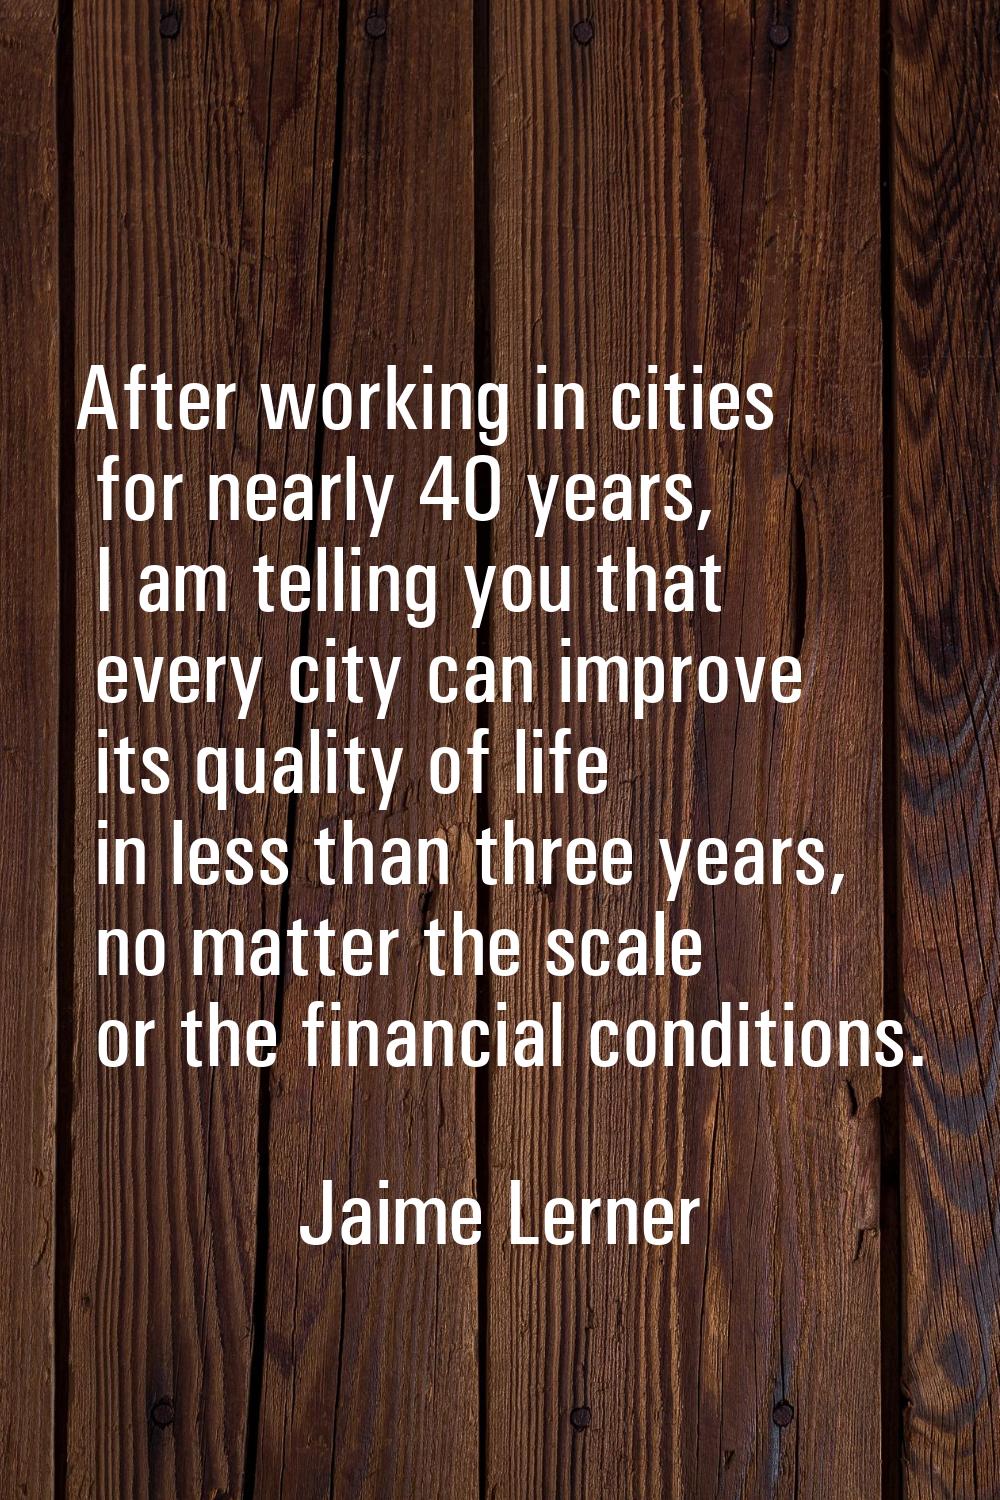 After working in cities for nearly 40 years, I am telling you that every city can improve its quali